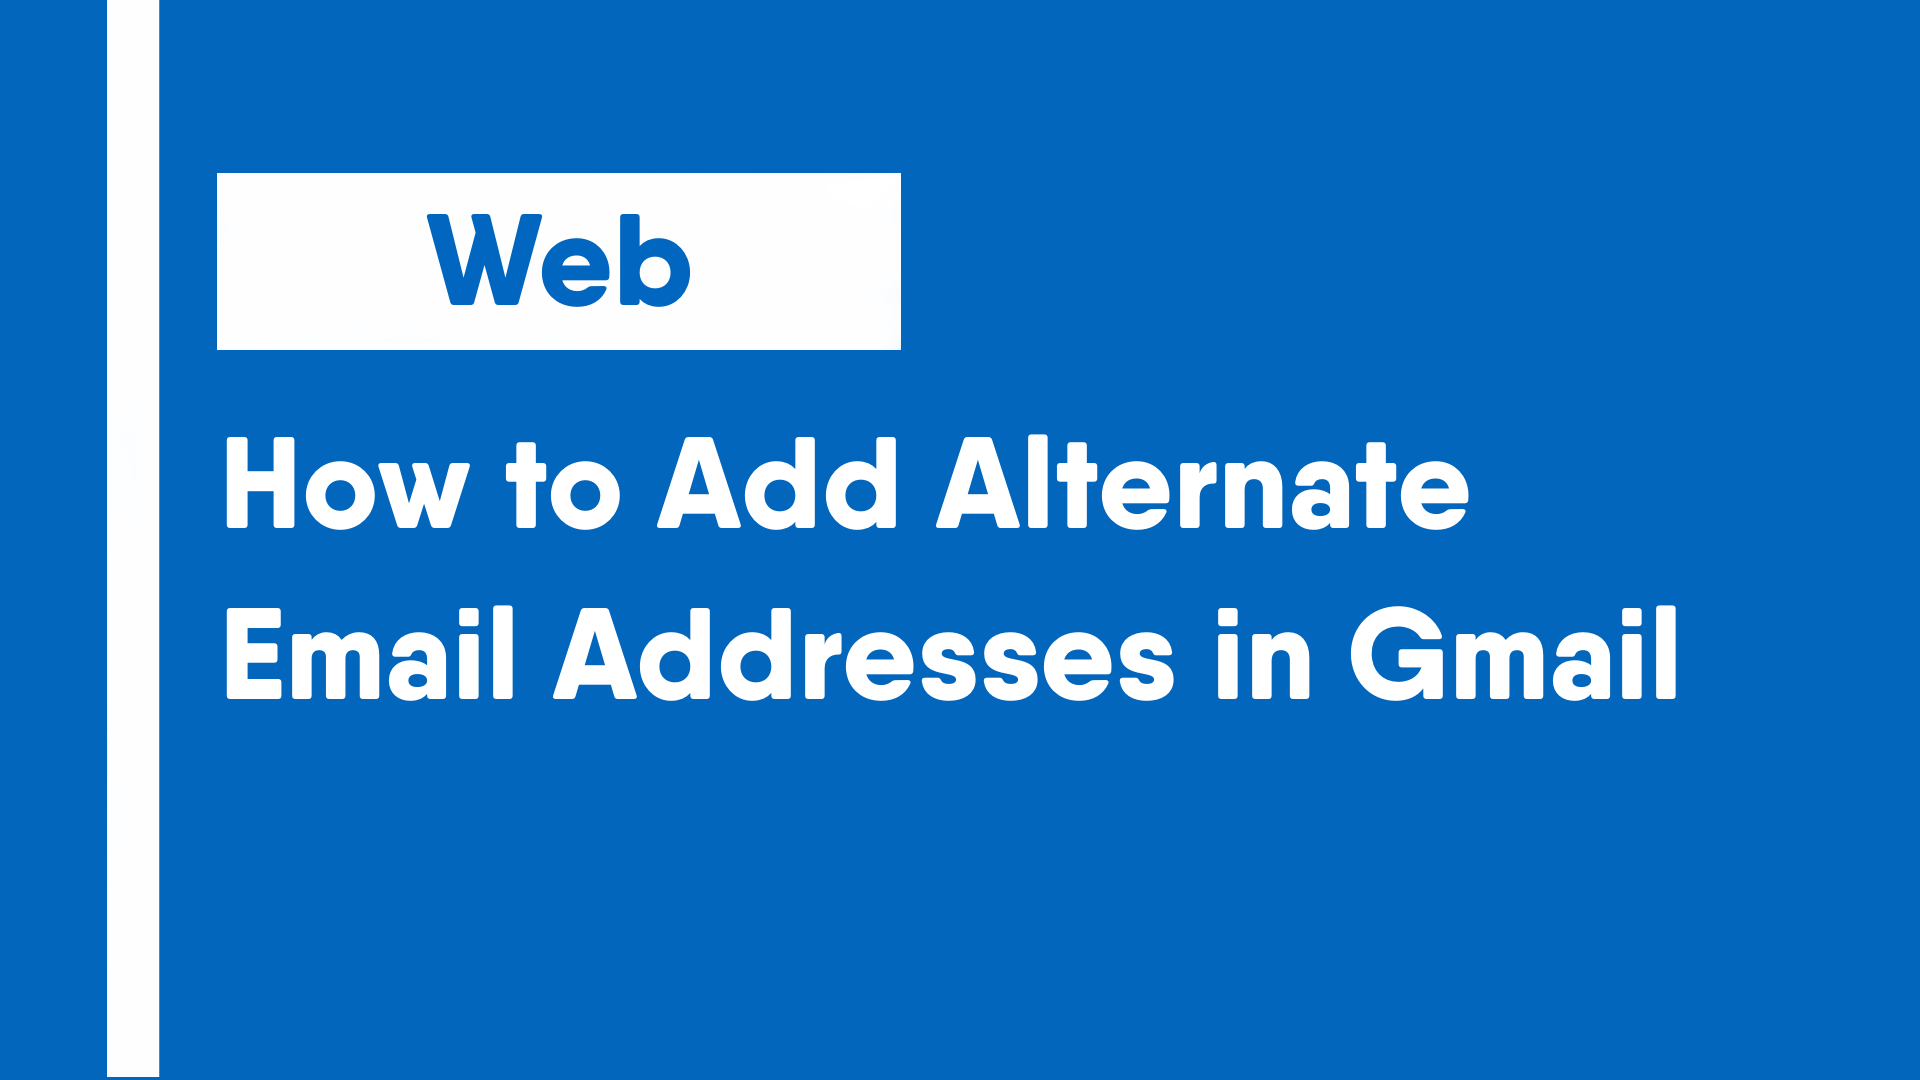 How to Add Alternate Email Addresses in Gmail